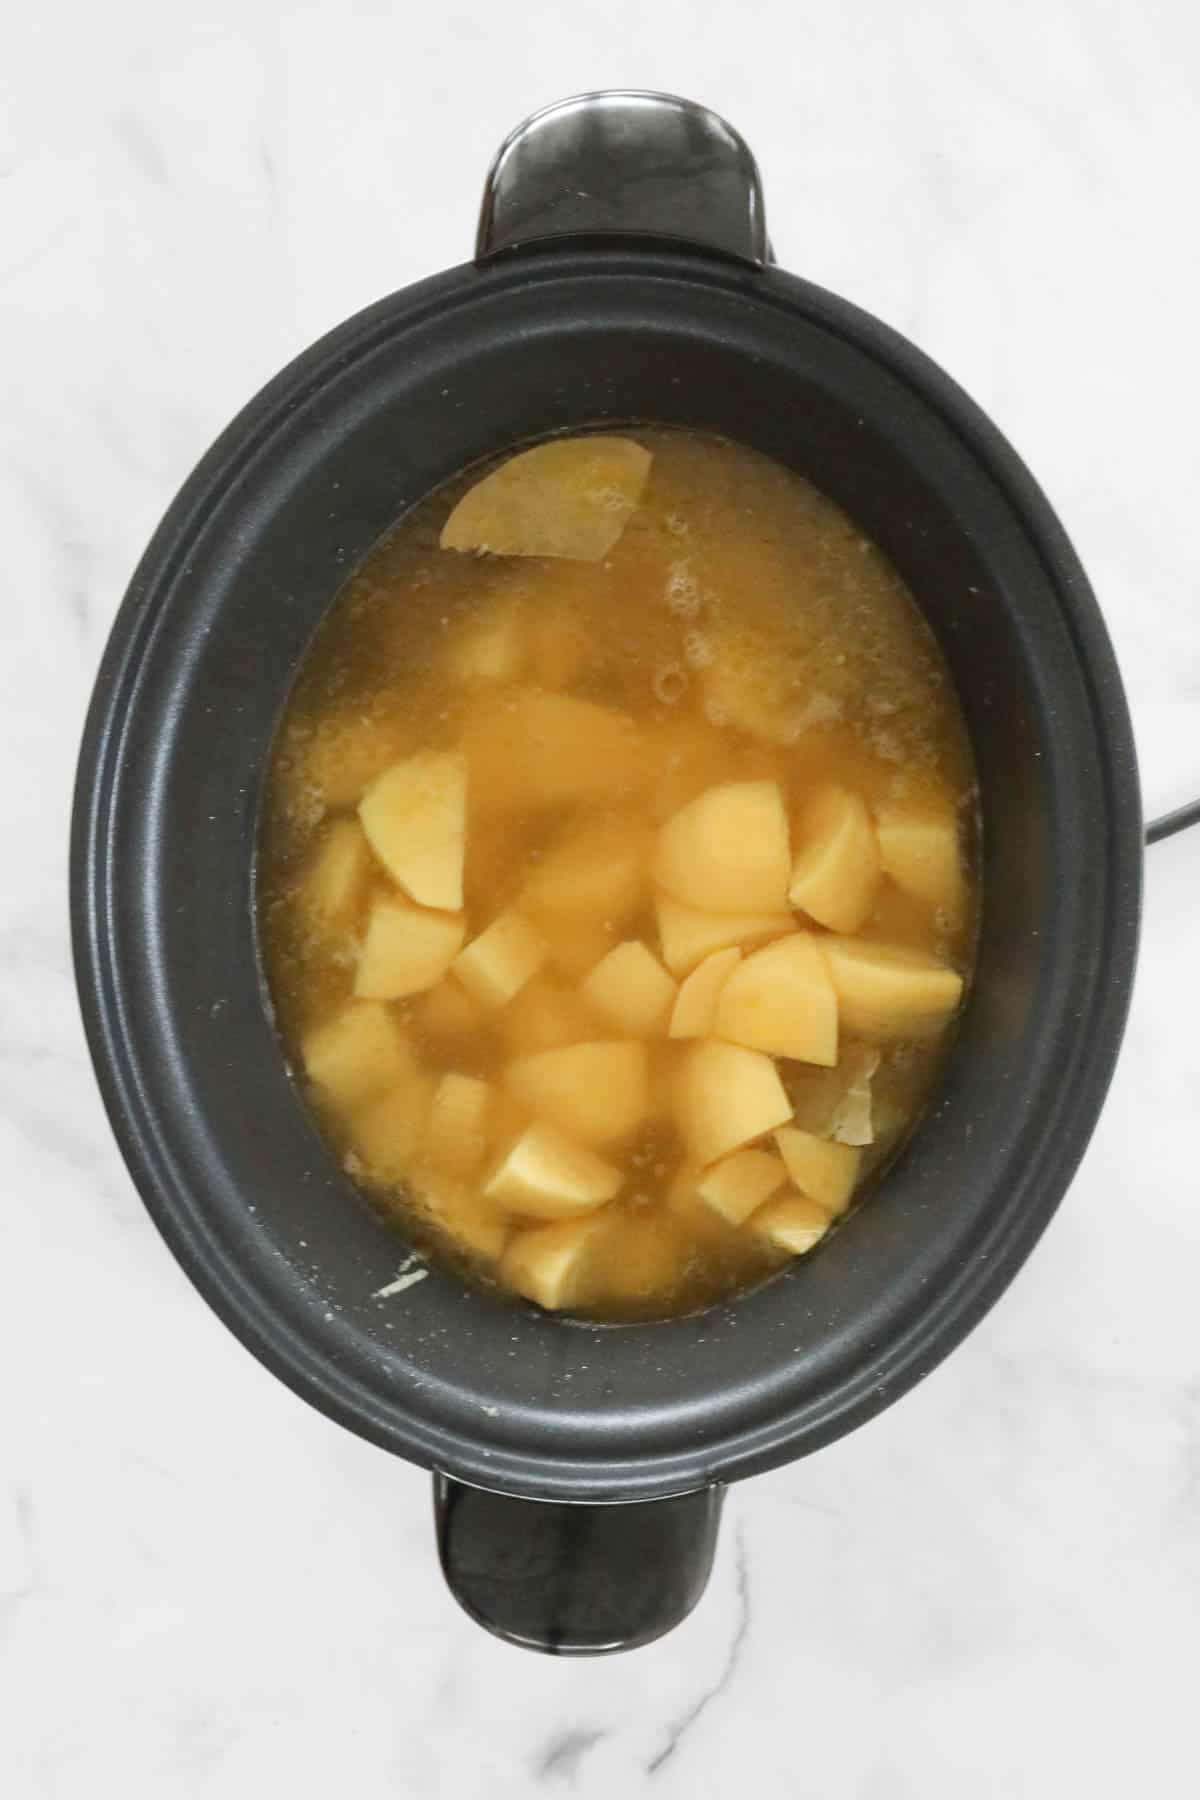 Chunks of potato and liquid stock added to the crock pot.